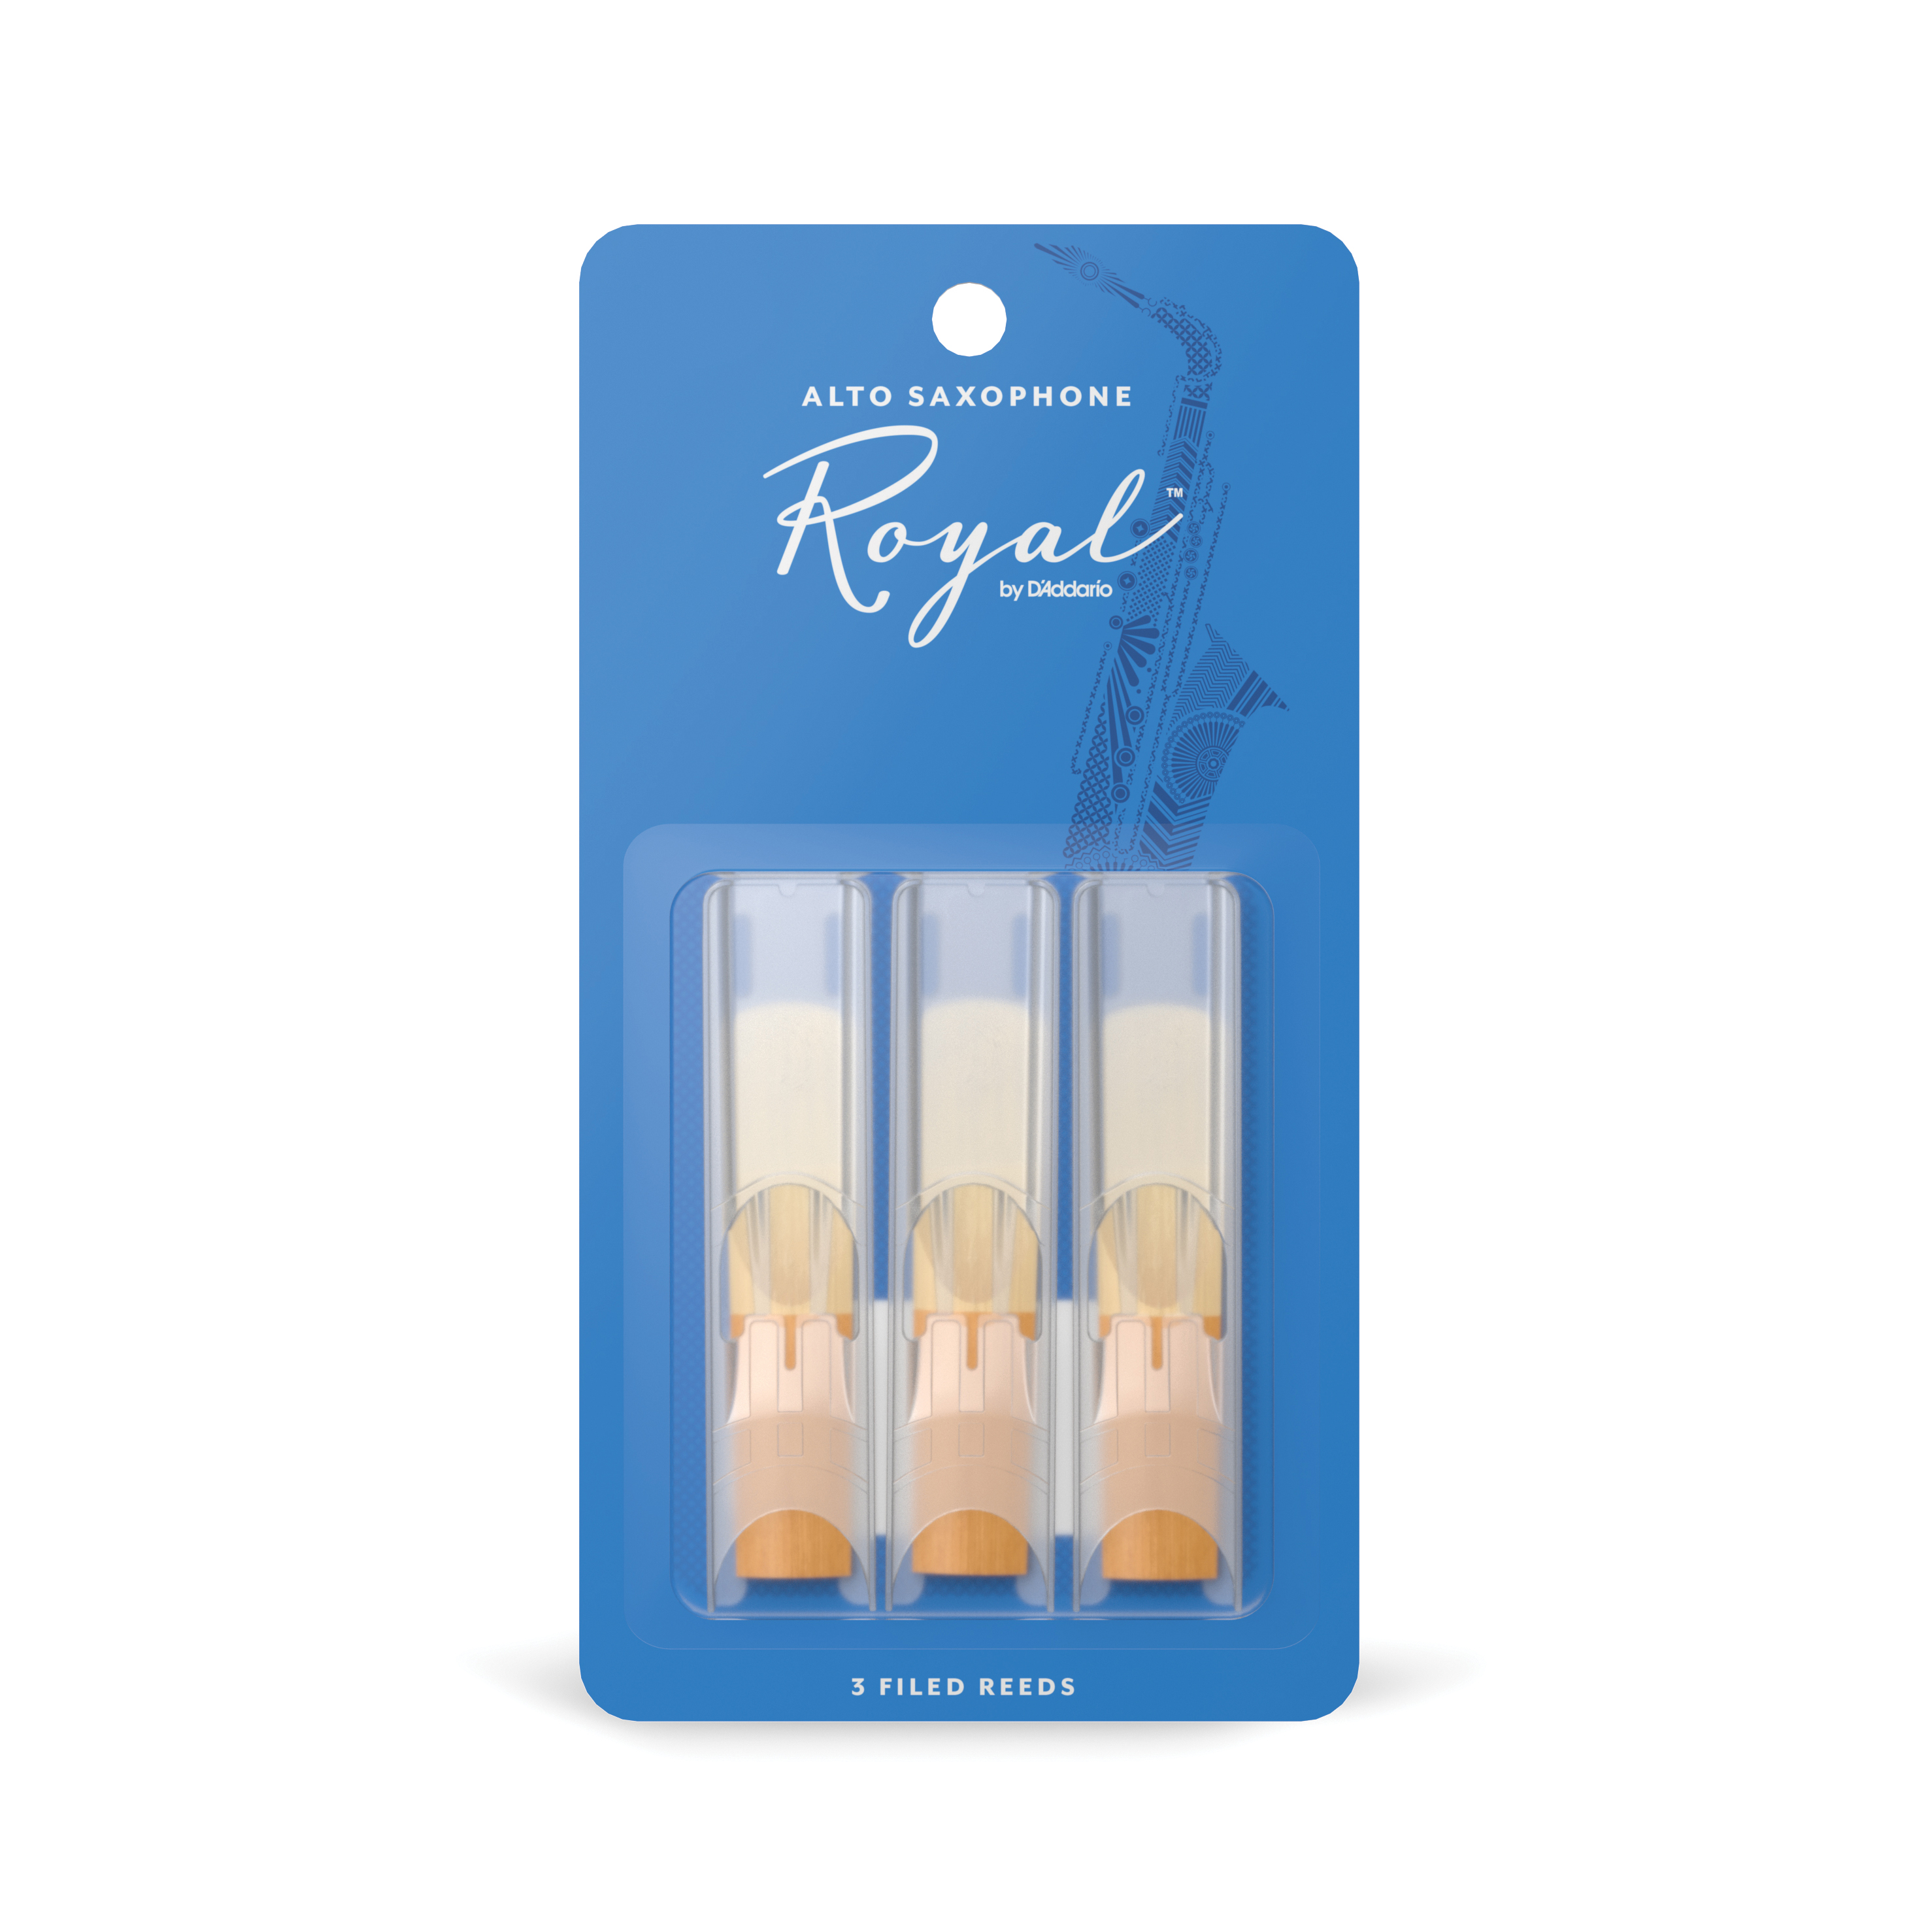 Blue card of three Royal by D'addario Alto Sax Reeds strength two and a half